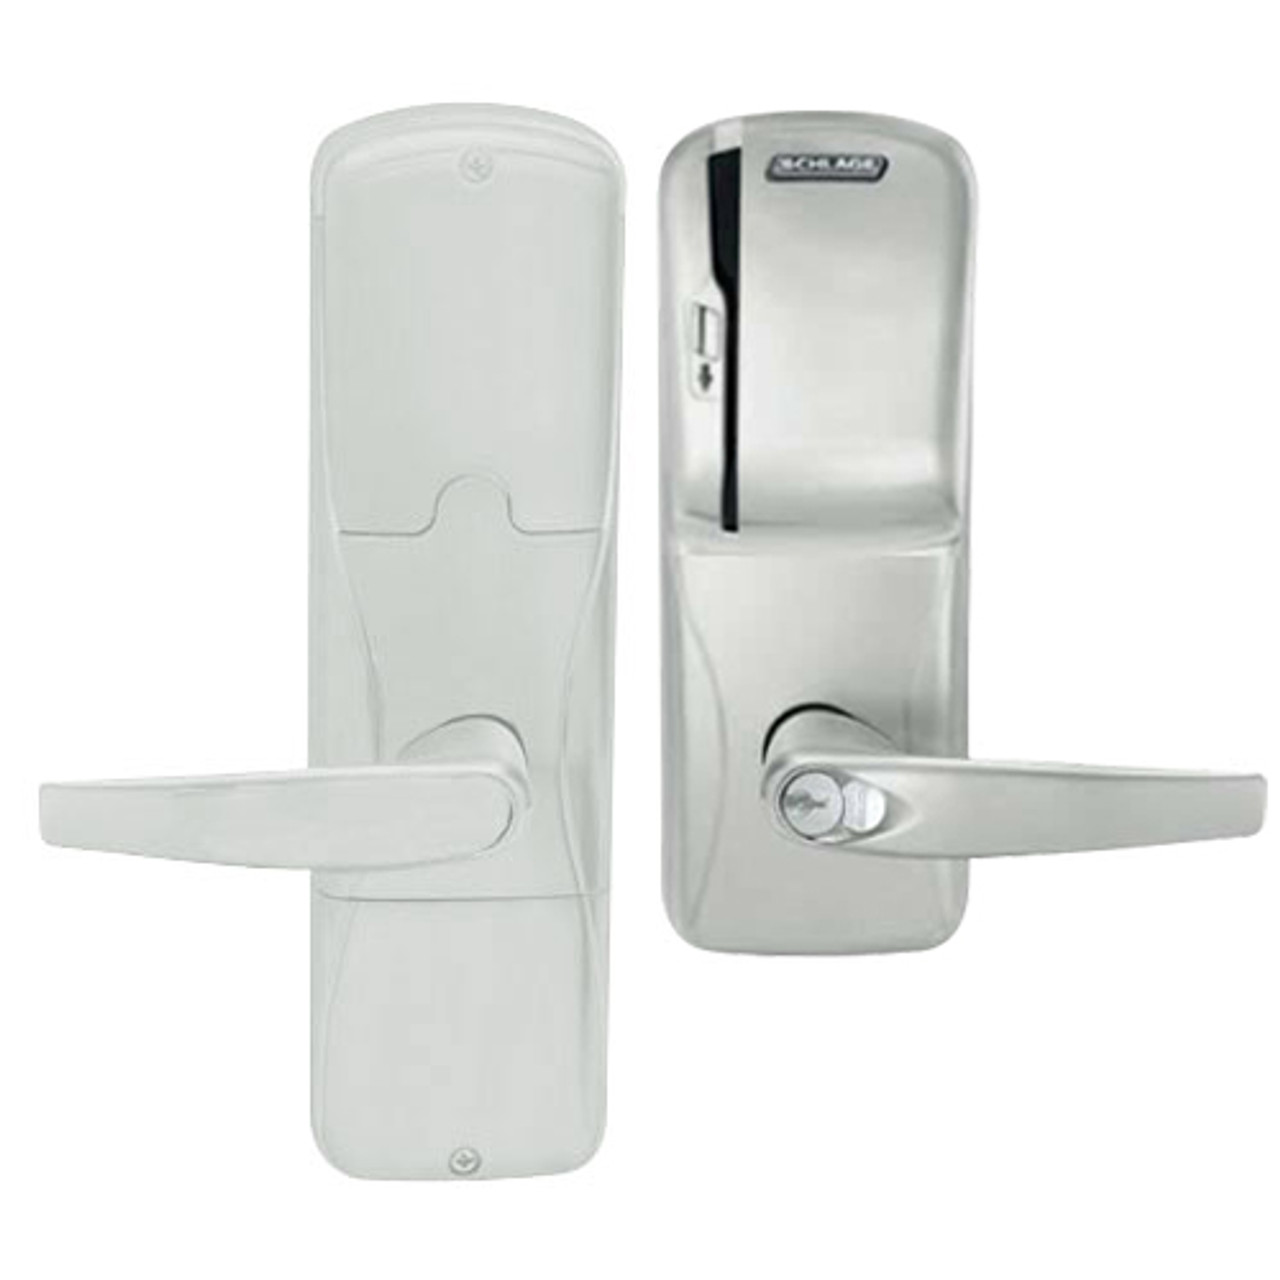 AD200-CY-60-MS-ATH-RD-619 Schlage Apartment Magnetic Stripe(Swipe) Lock with Athens Lever in Satin Nickel